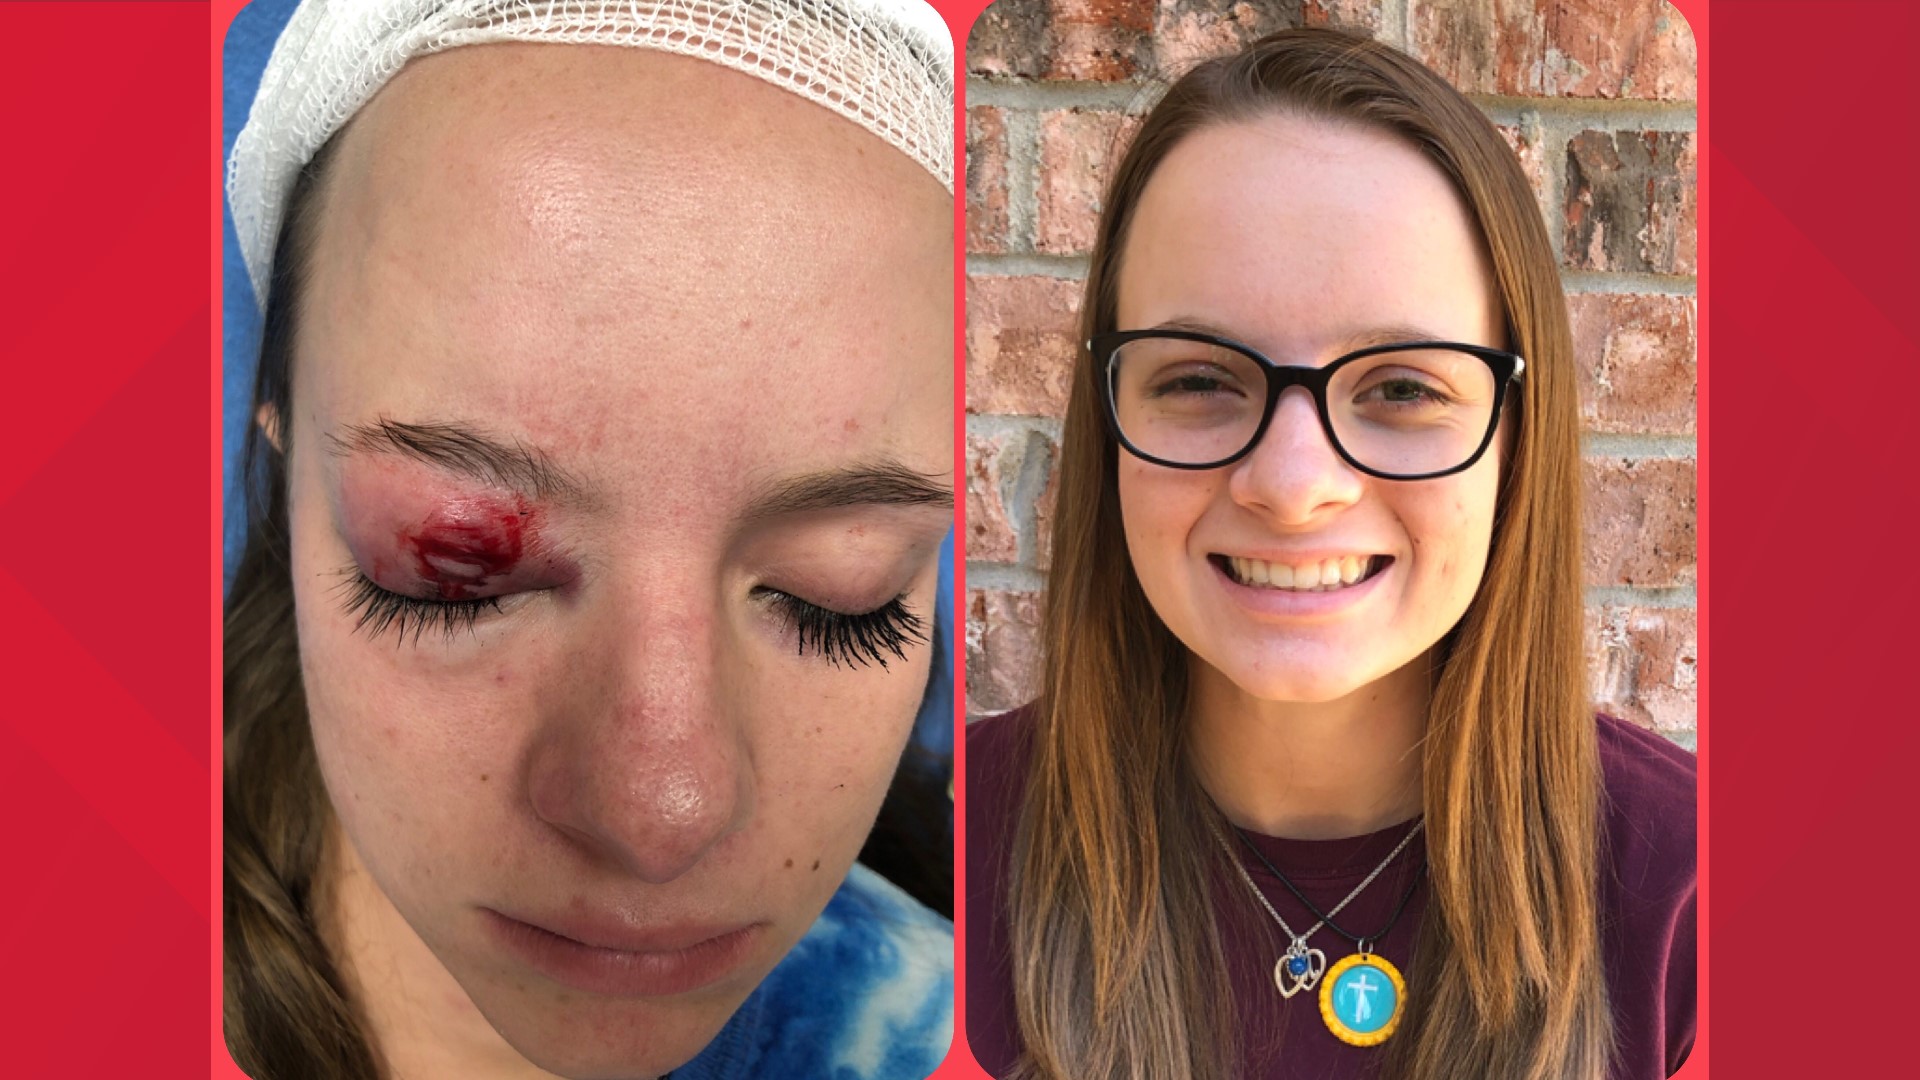 A Waco teen lost sight in her right eye after a firework hit her in the eye on the 4th of July.